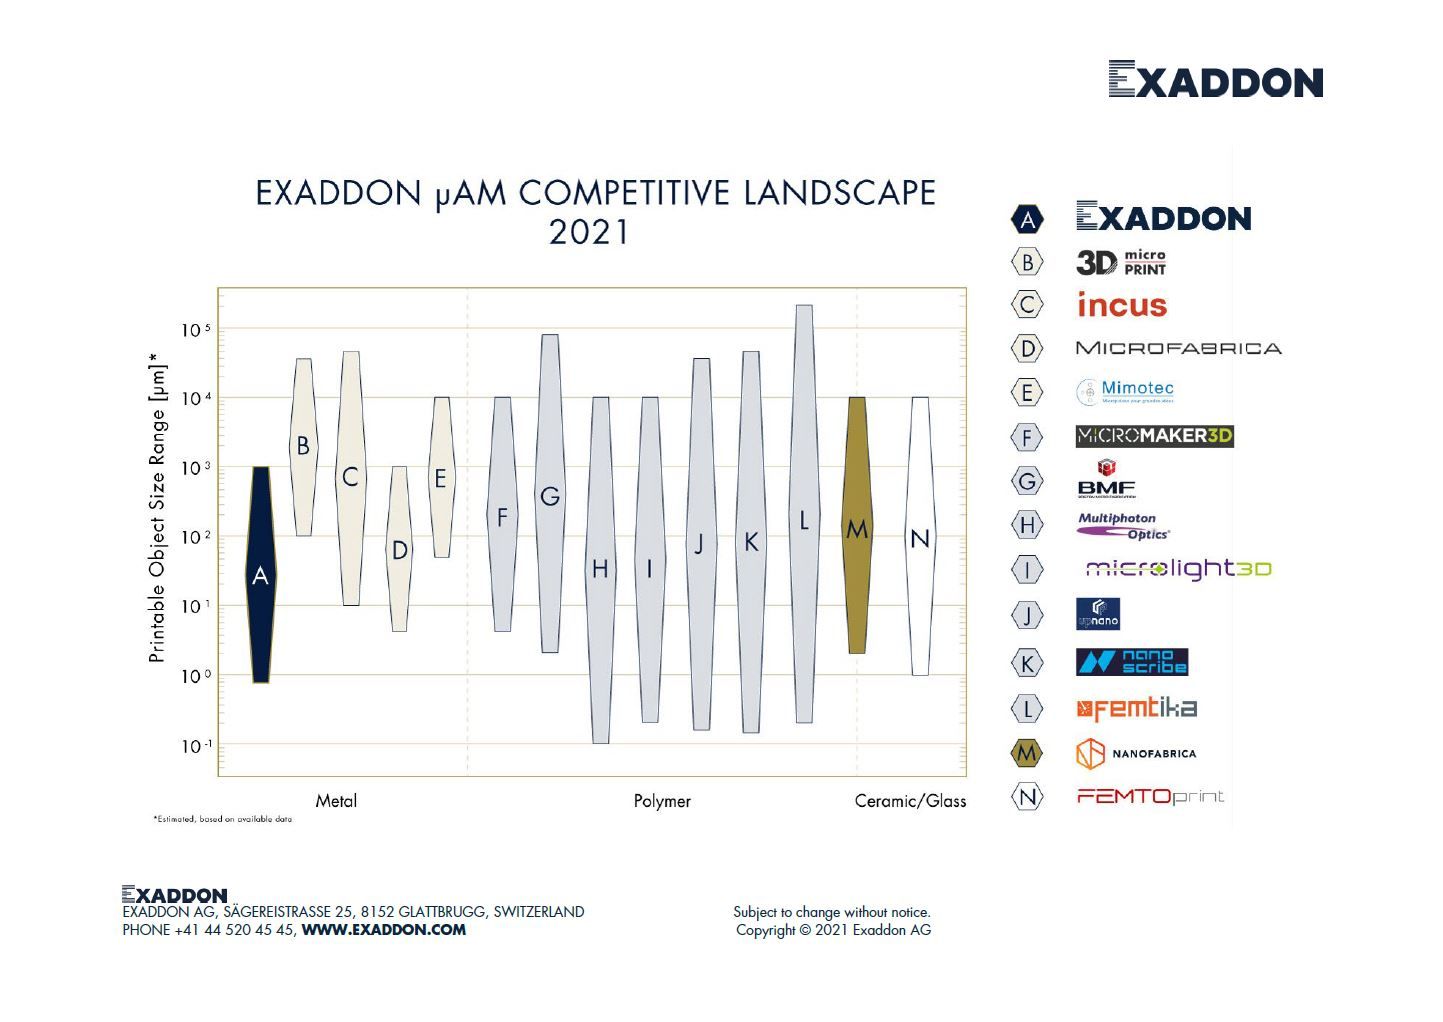 Exaddon White Paper - Additive Manufacturing at the Microscale - Landscape Analysis 2021